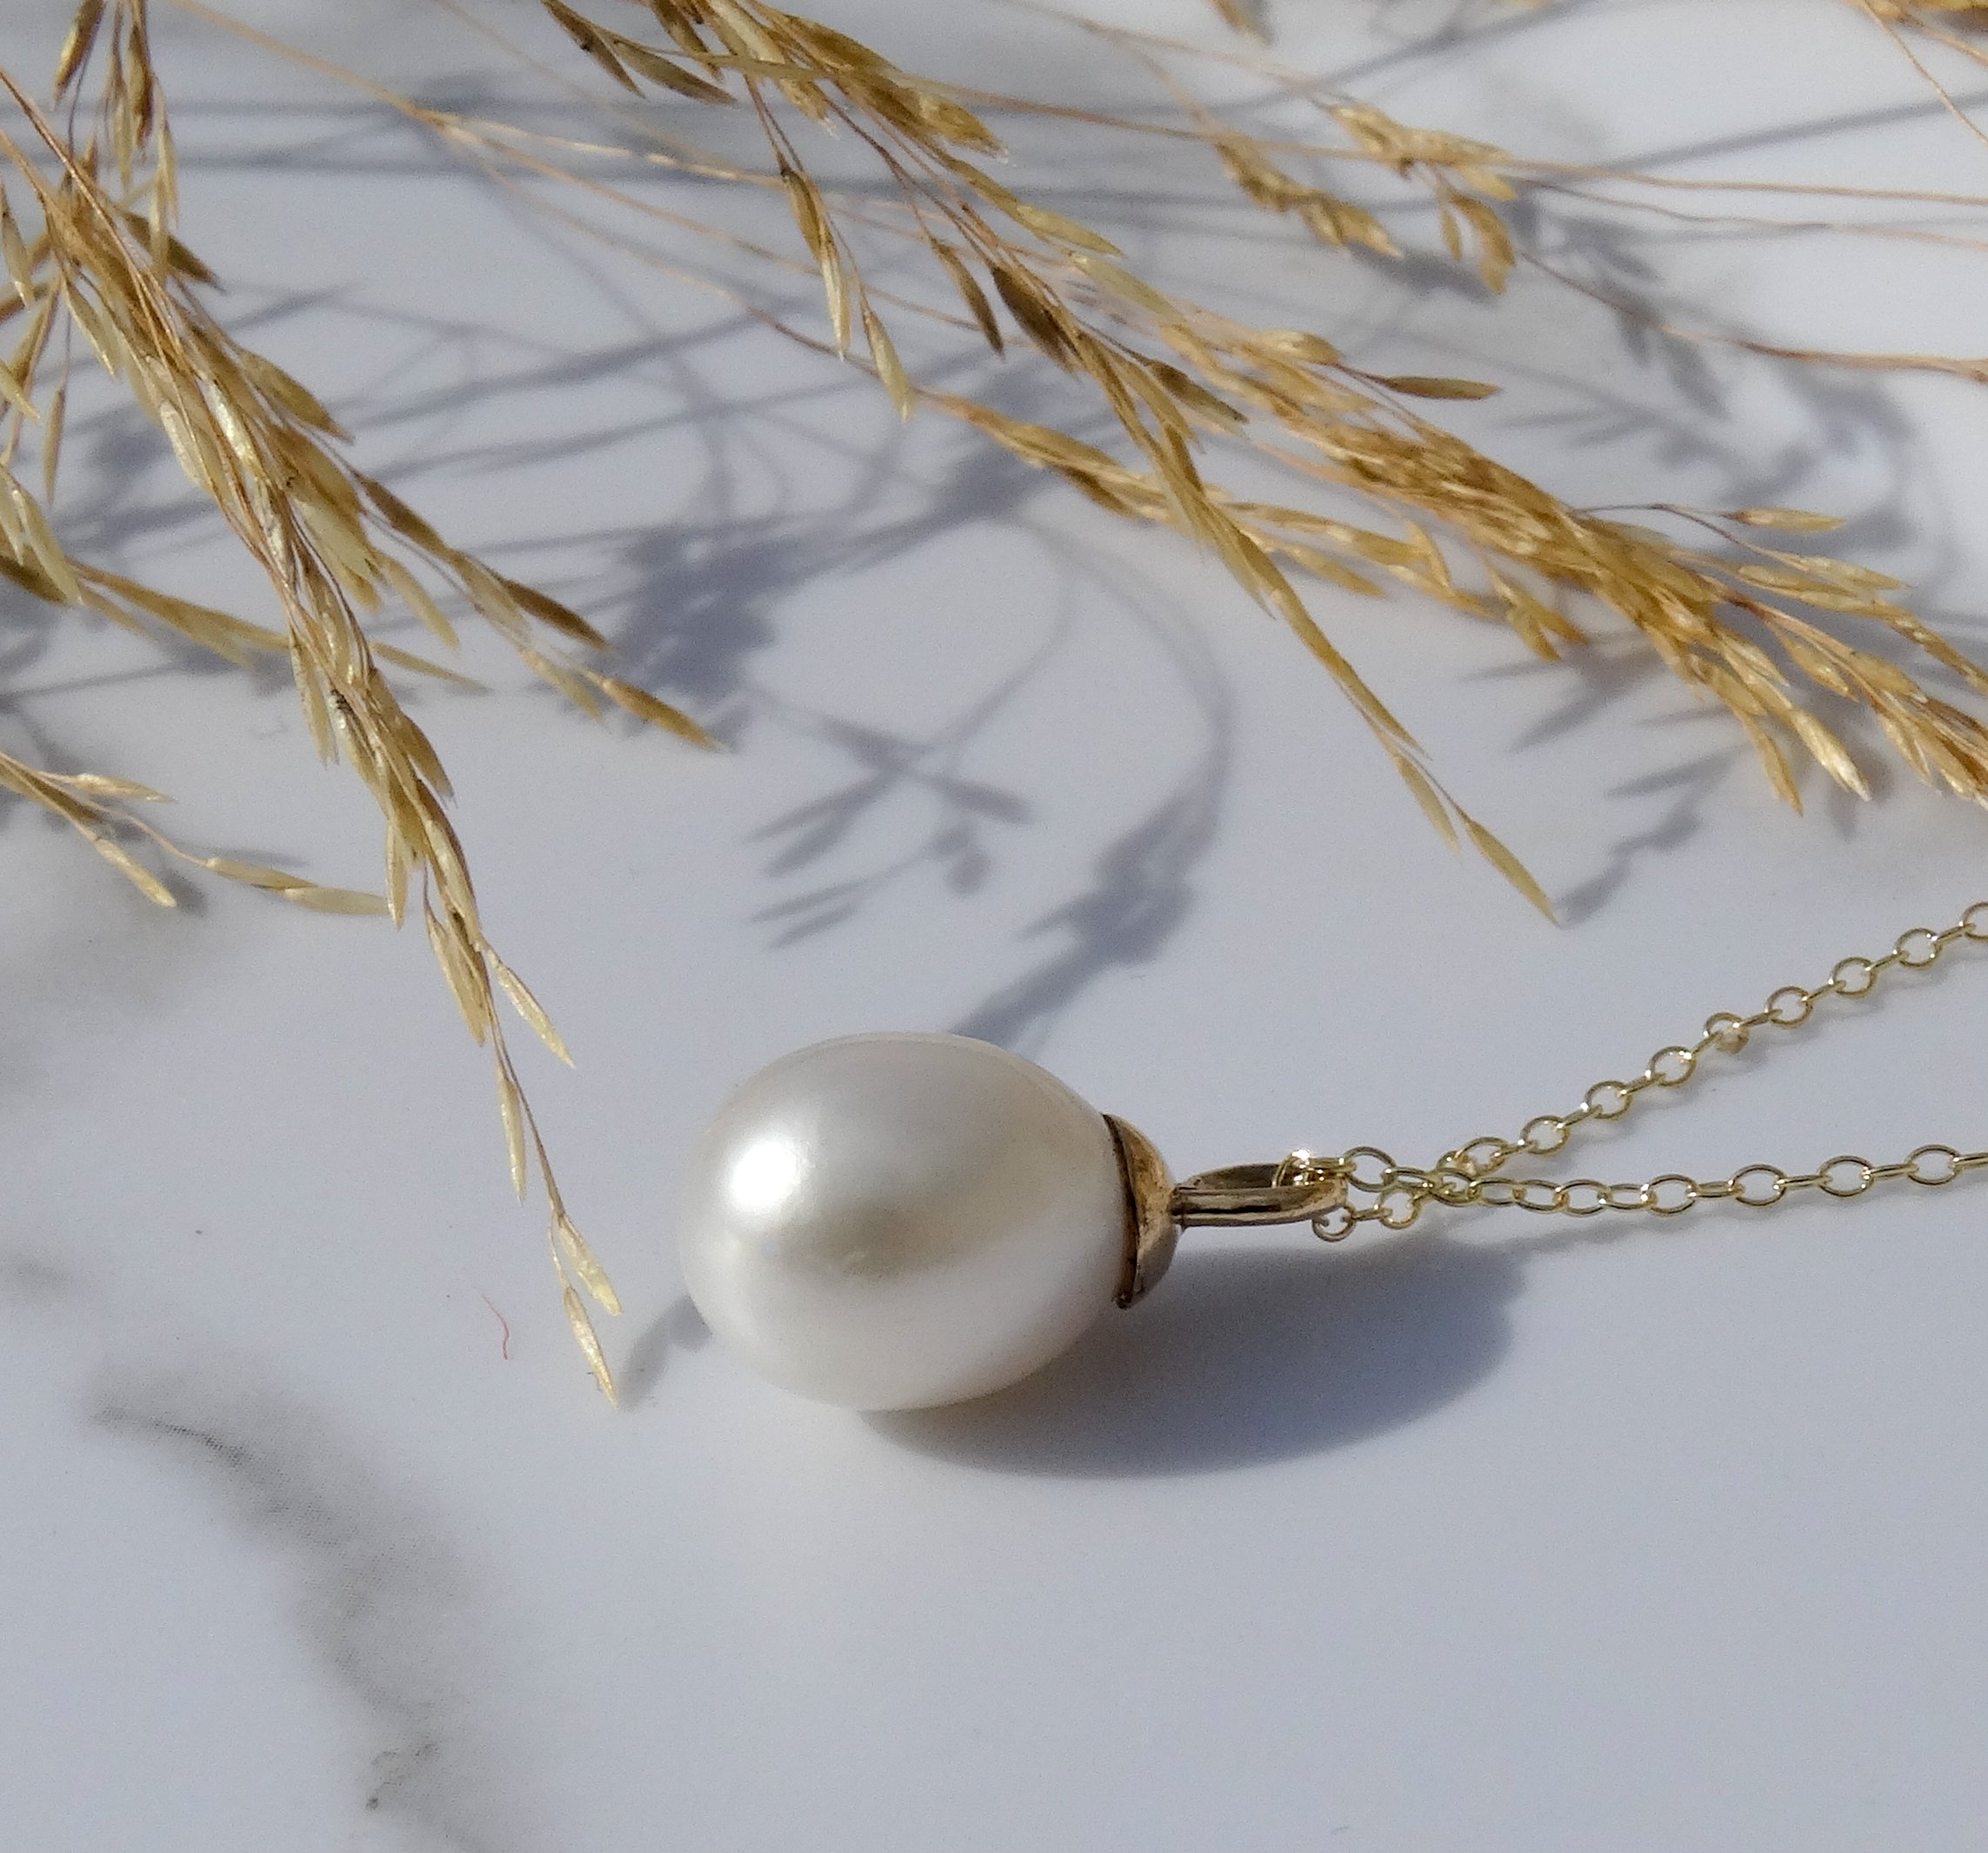 Oversized Baroque Pearl Necklace Diameter 17-20mm Natural White Pearl  Necklace Flame Ball Baroque Exaggerated Ladies Necklace